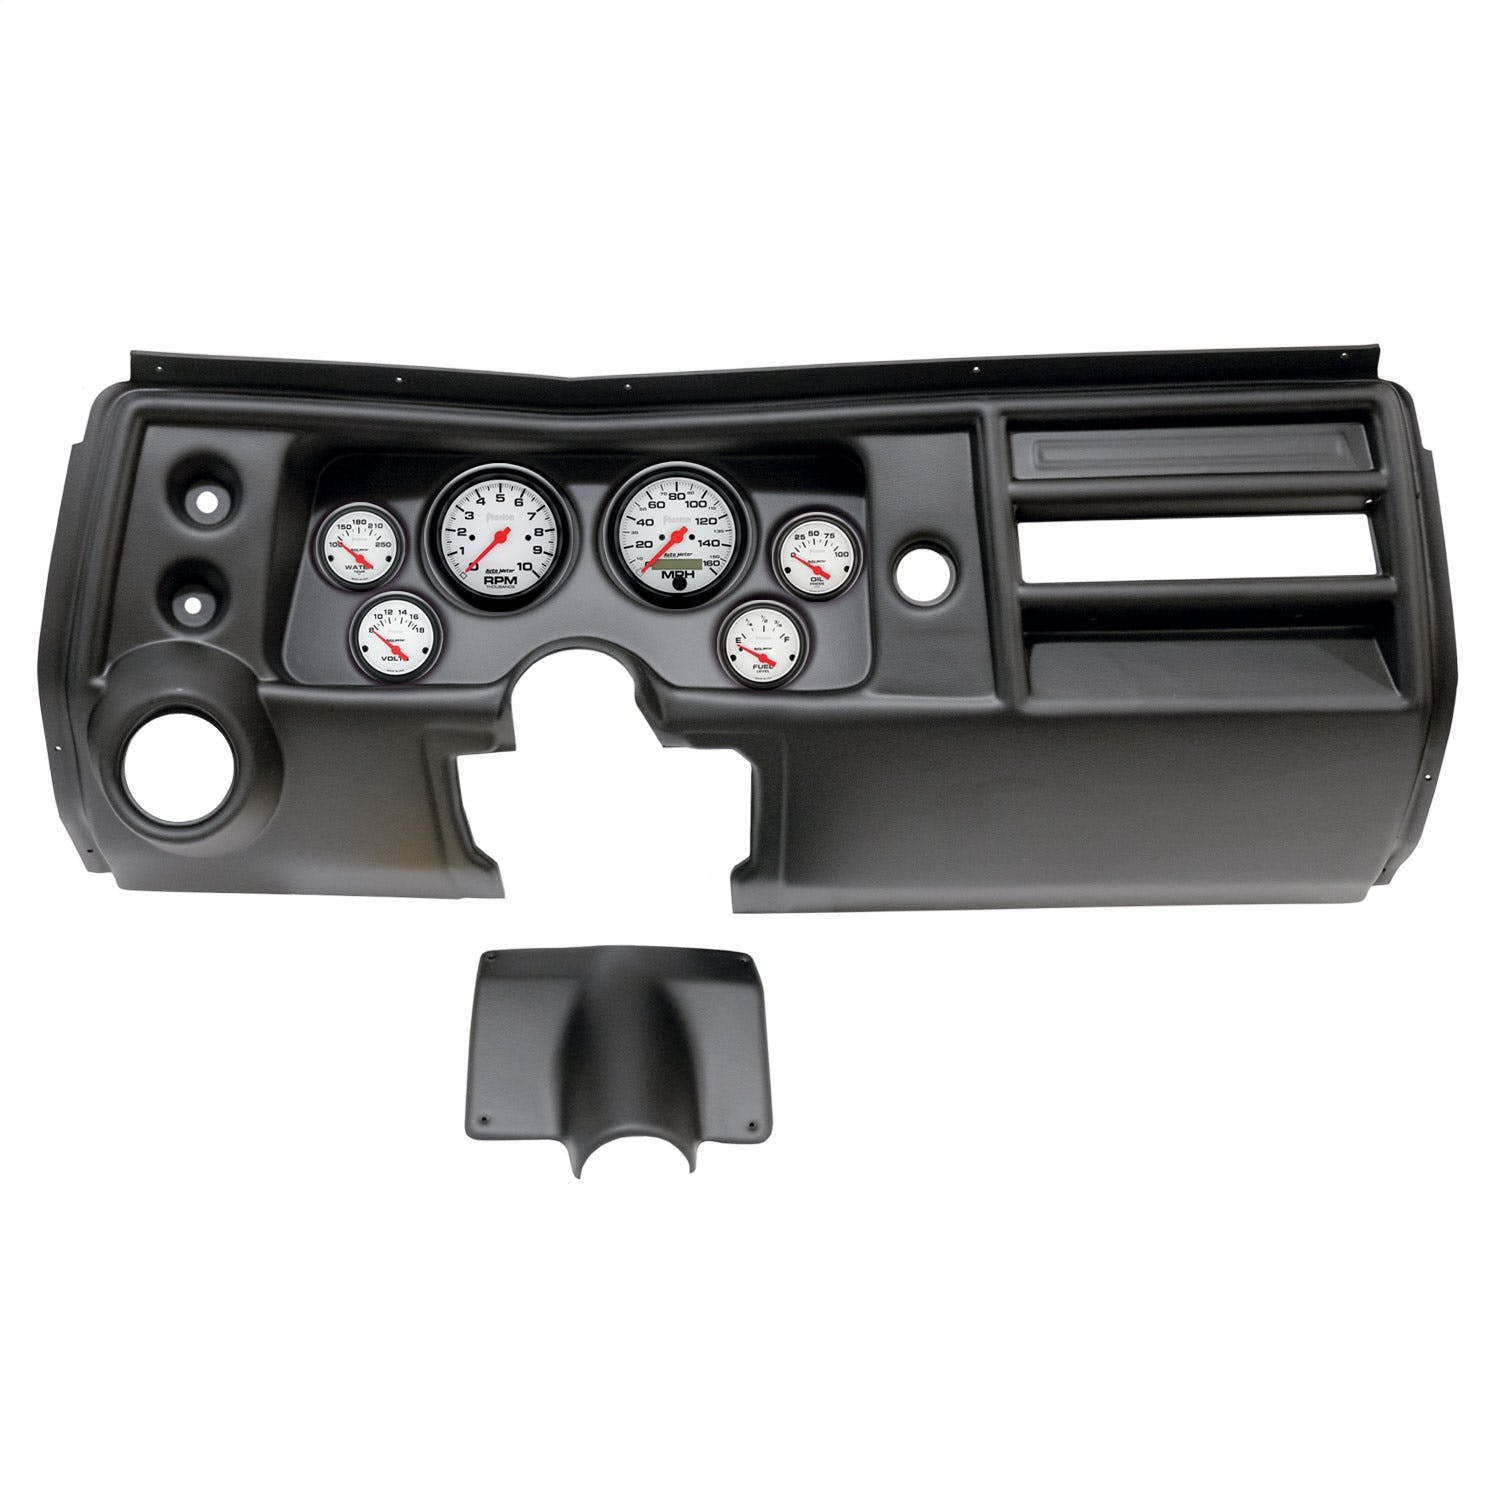 AutoMeter Products 2902-09 6 Gauge Direct-Fit Dash Kit, Chevy Chevelle Vent 68, Phantom